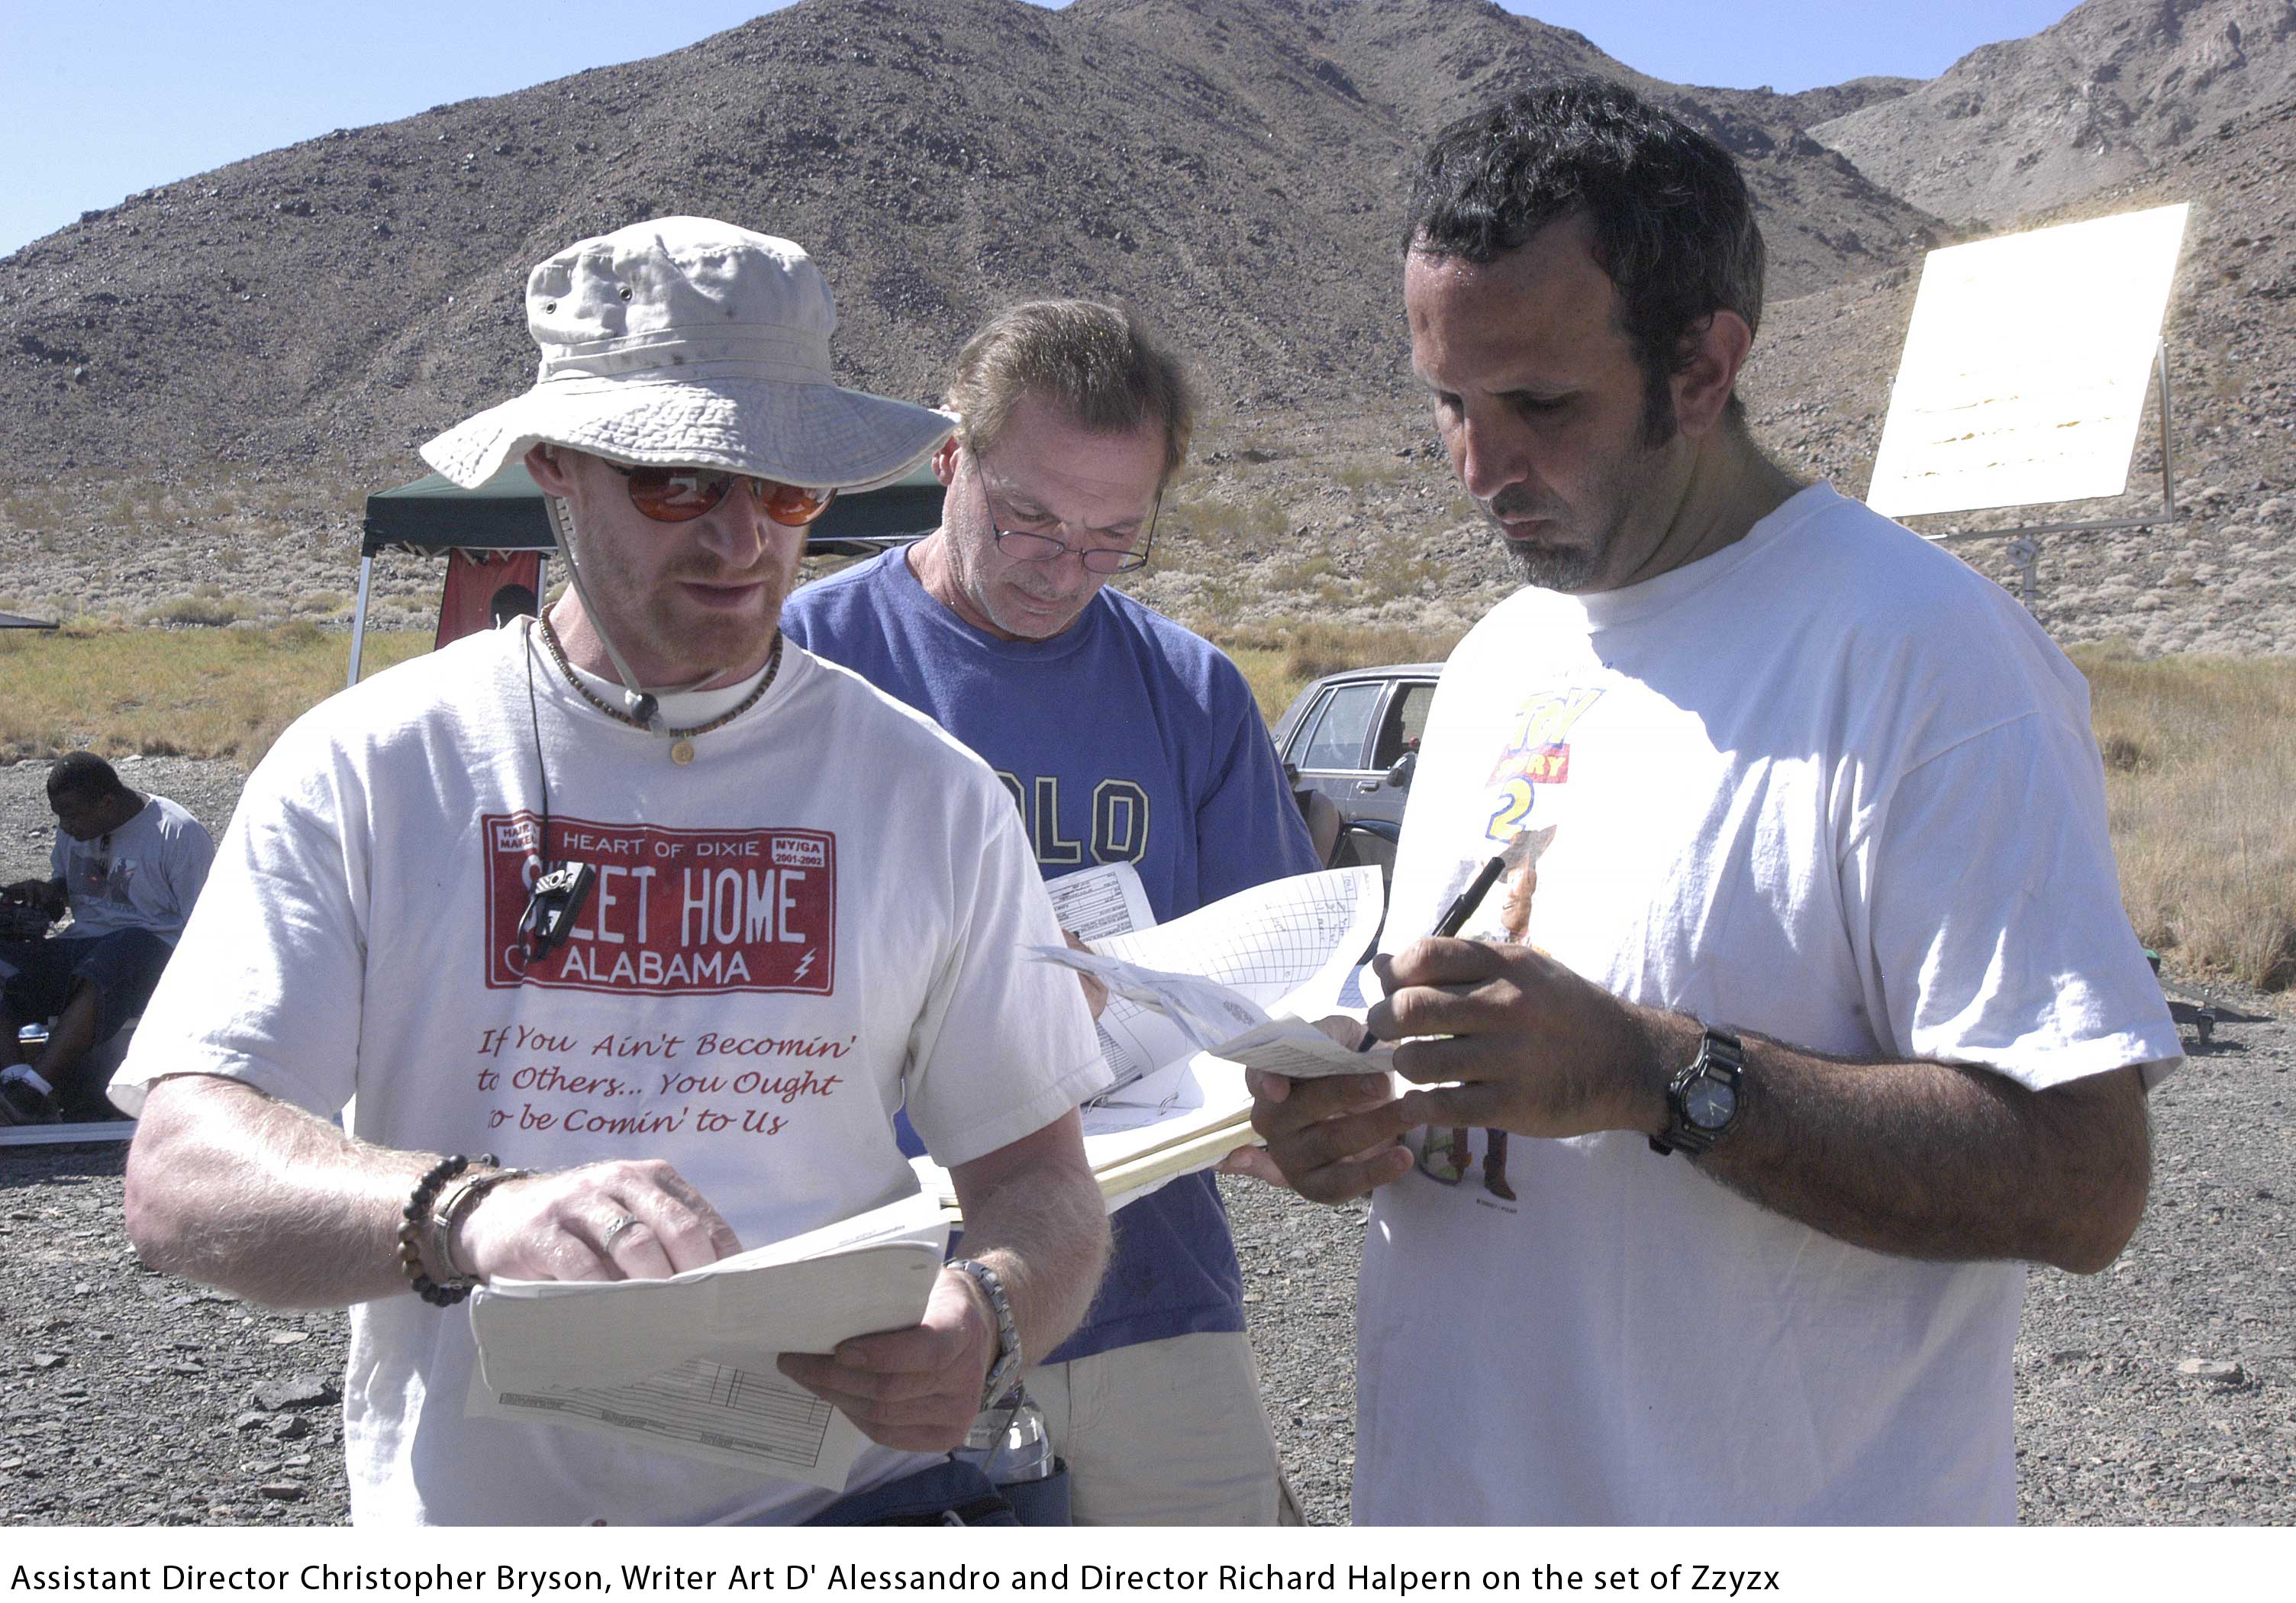 Christopher Bryson, AD, Art, and Director Richard Halpern, out on Zzyzx Rd. in the Mojave.